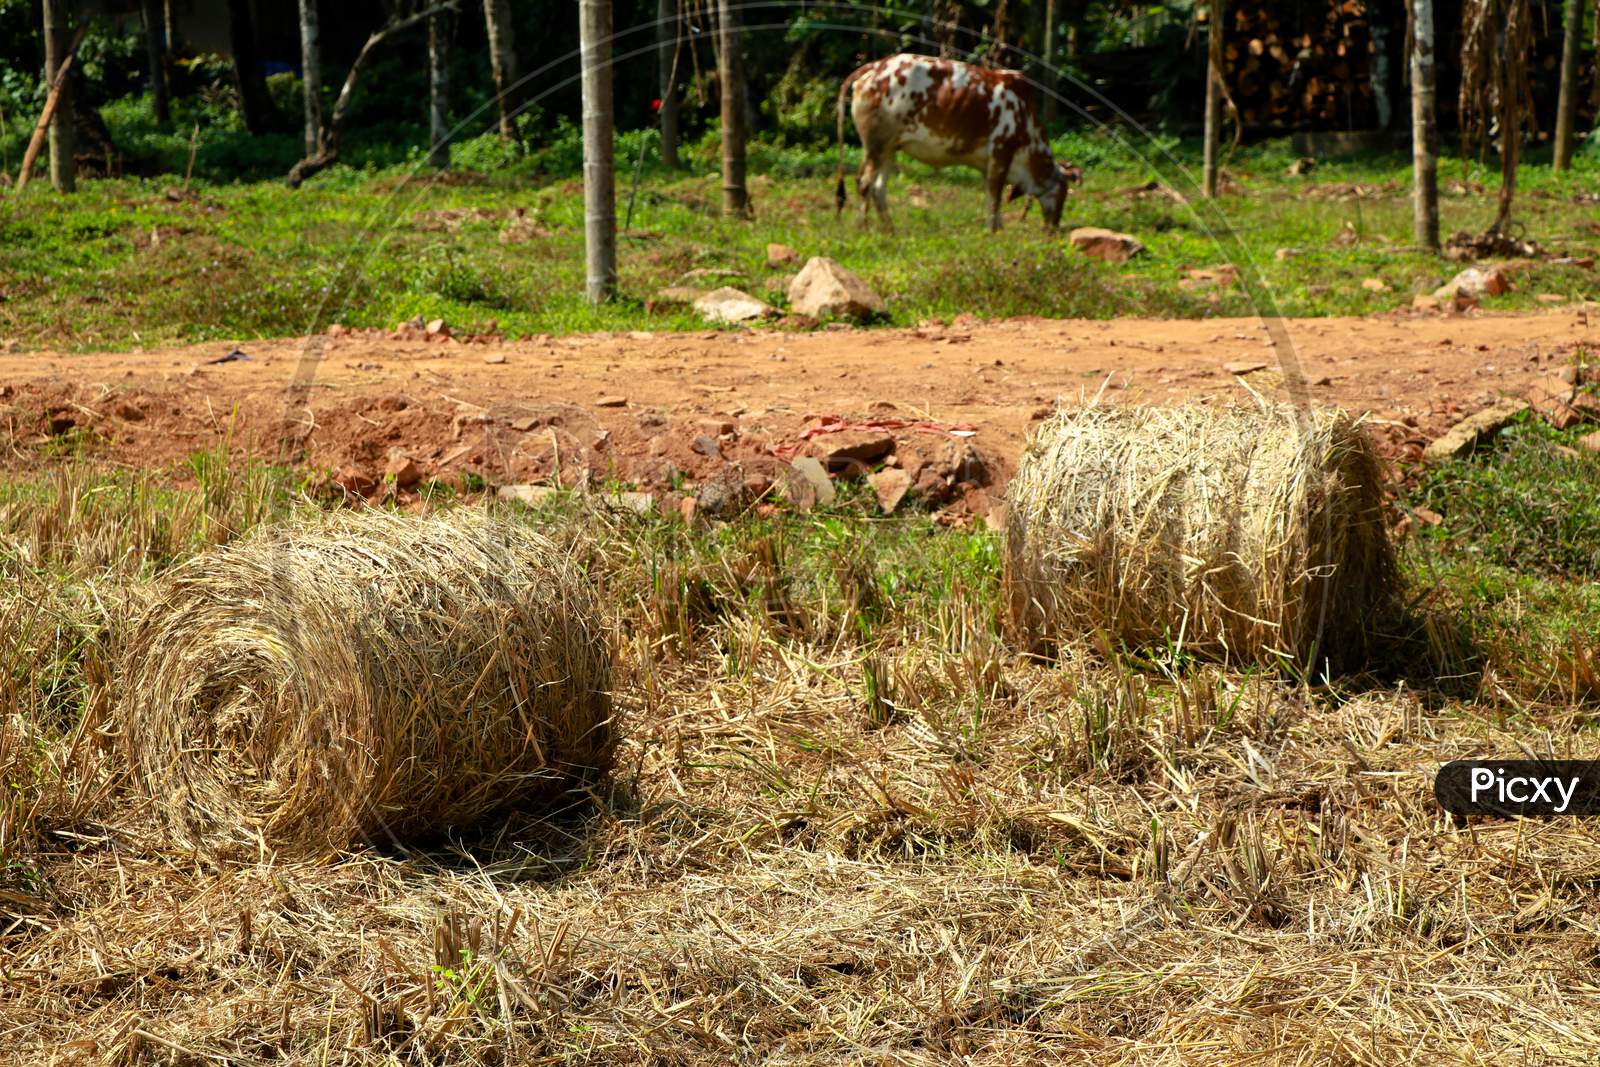 Hay Or Straw Rolls In The Paddy Field